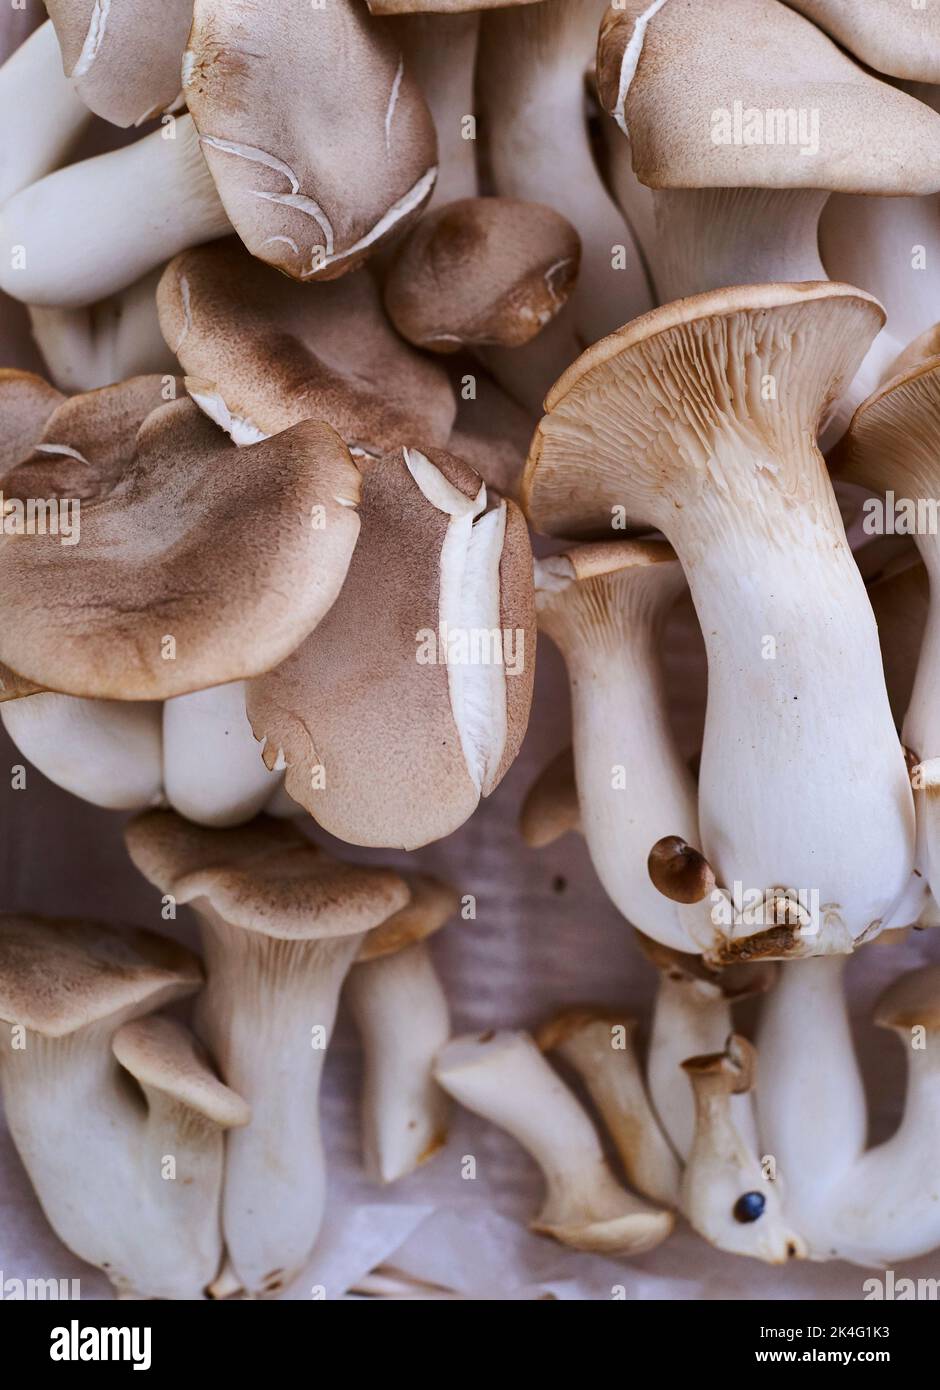 King Oyster mushrooms are meaty mushrooms that stand up to stir-frying.  They have a savory or umami quality.  A natural substitute for meats. Organic Stock Photo